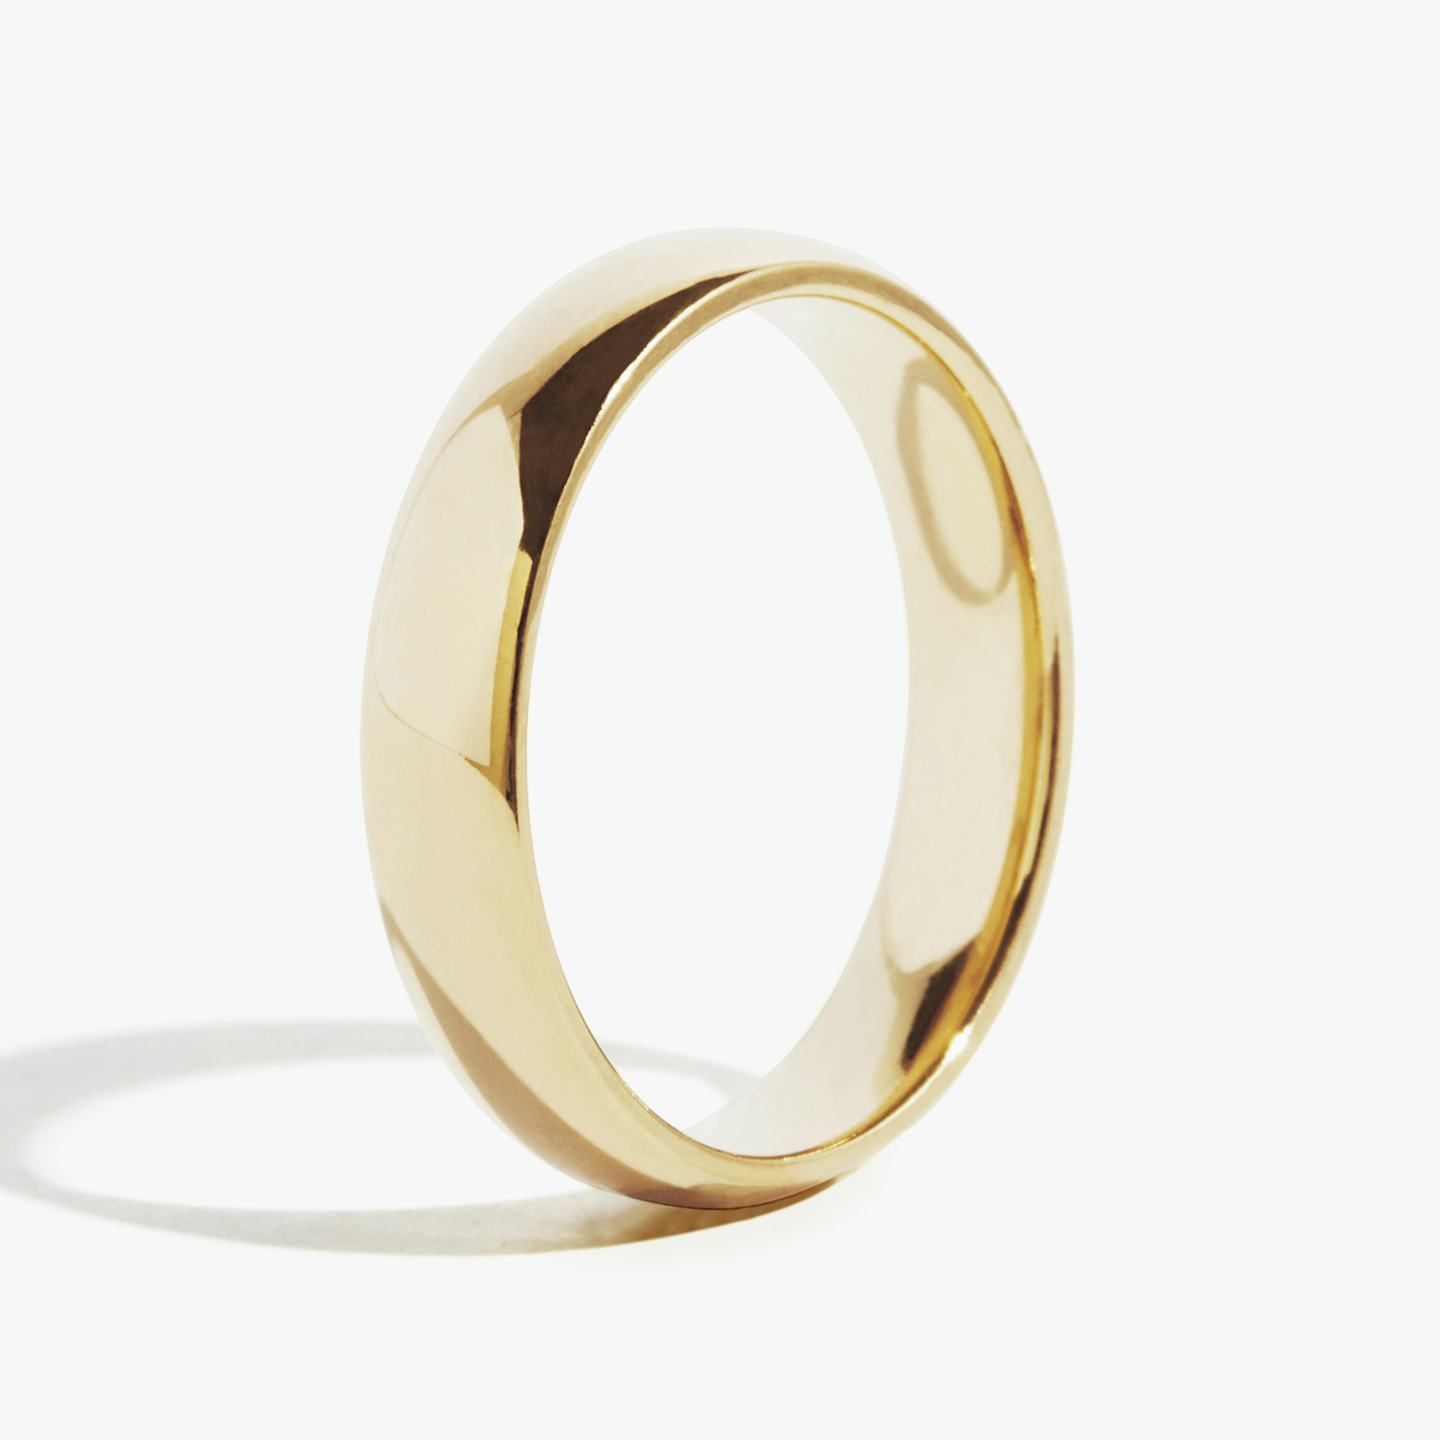 The Round | 18k | 18k Yellow Gold | Band width: Large - 4.5mm